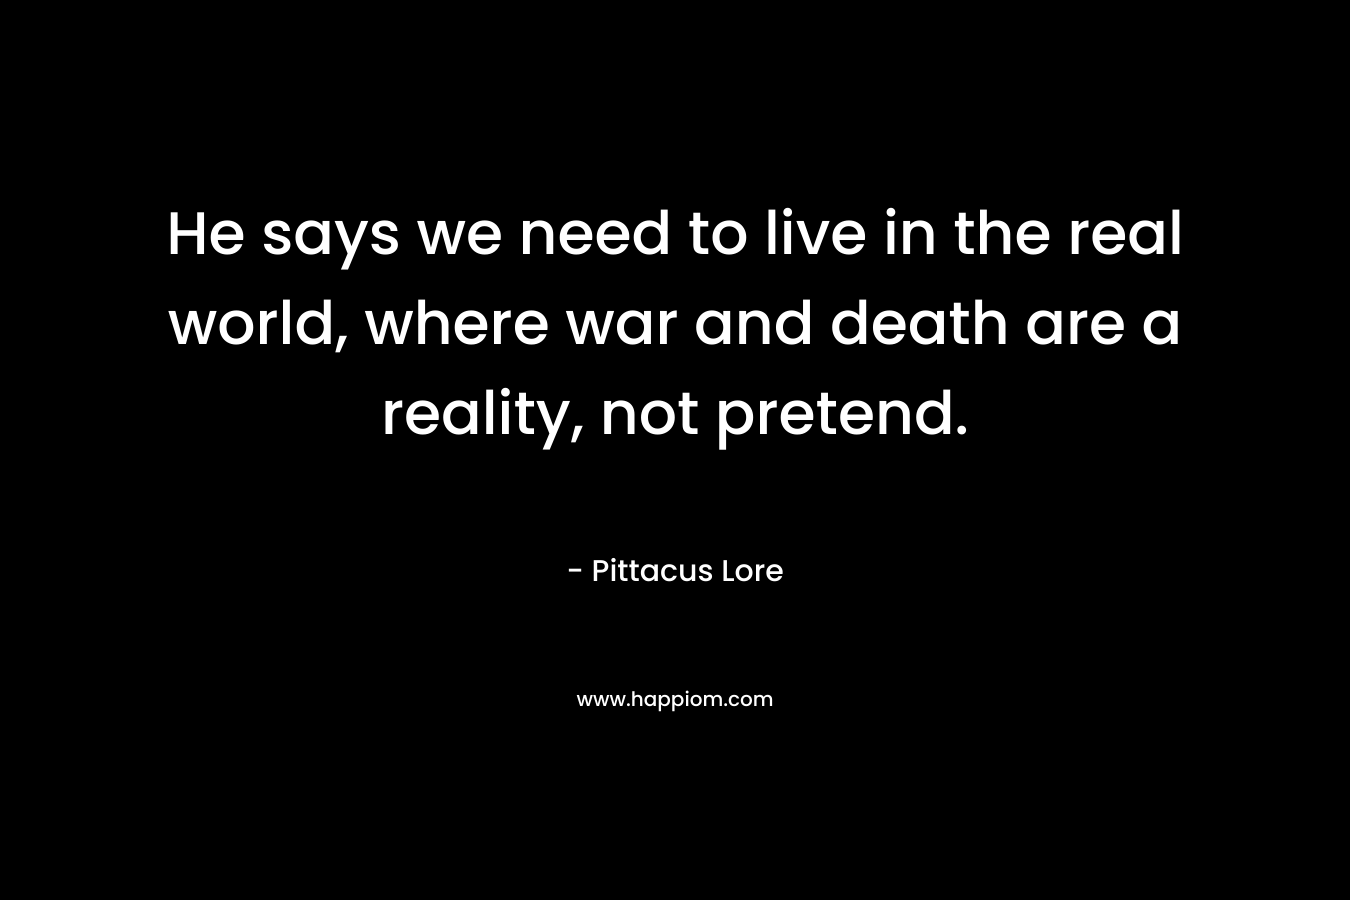 He says we need to live in the real world, where war and death are a reality, not pretend. – Pittacus Lore